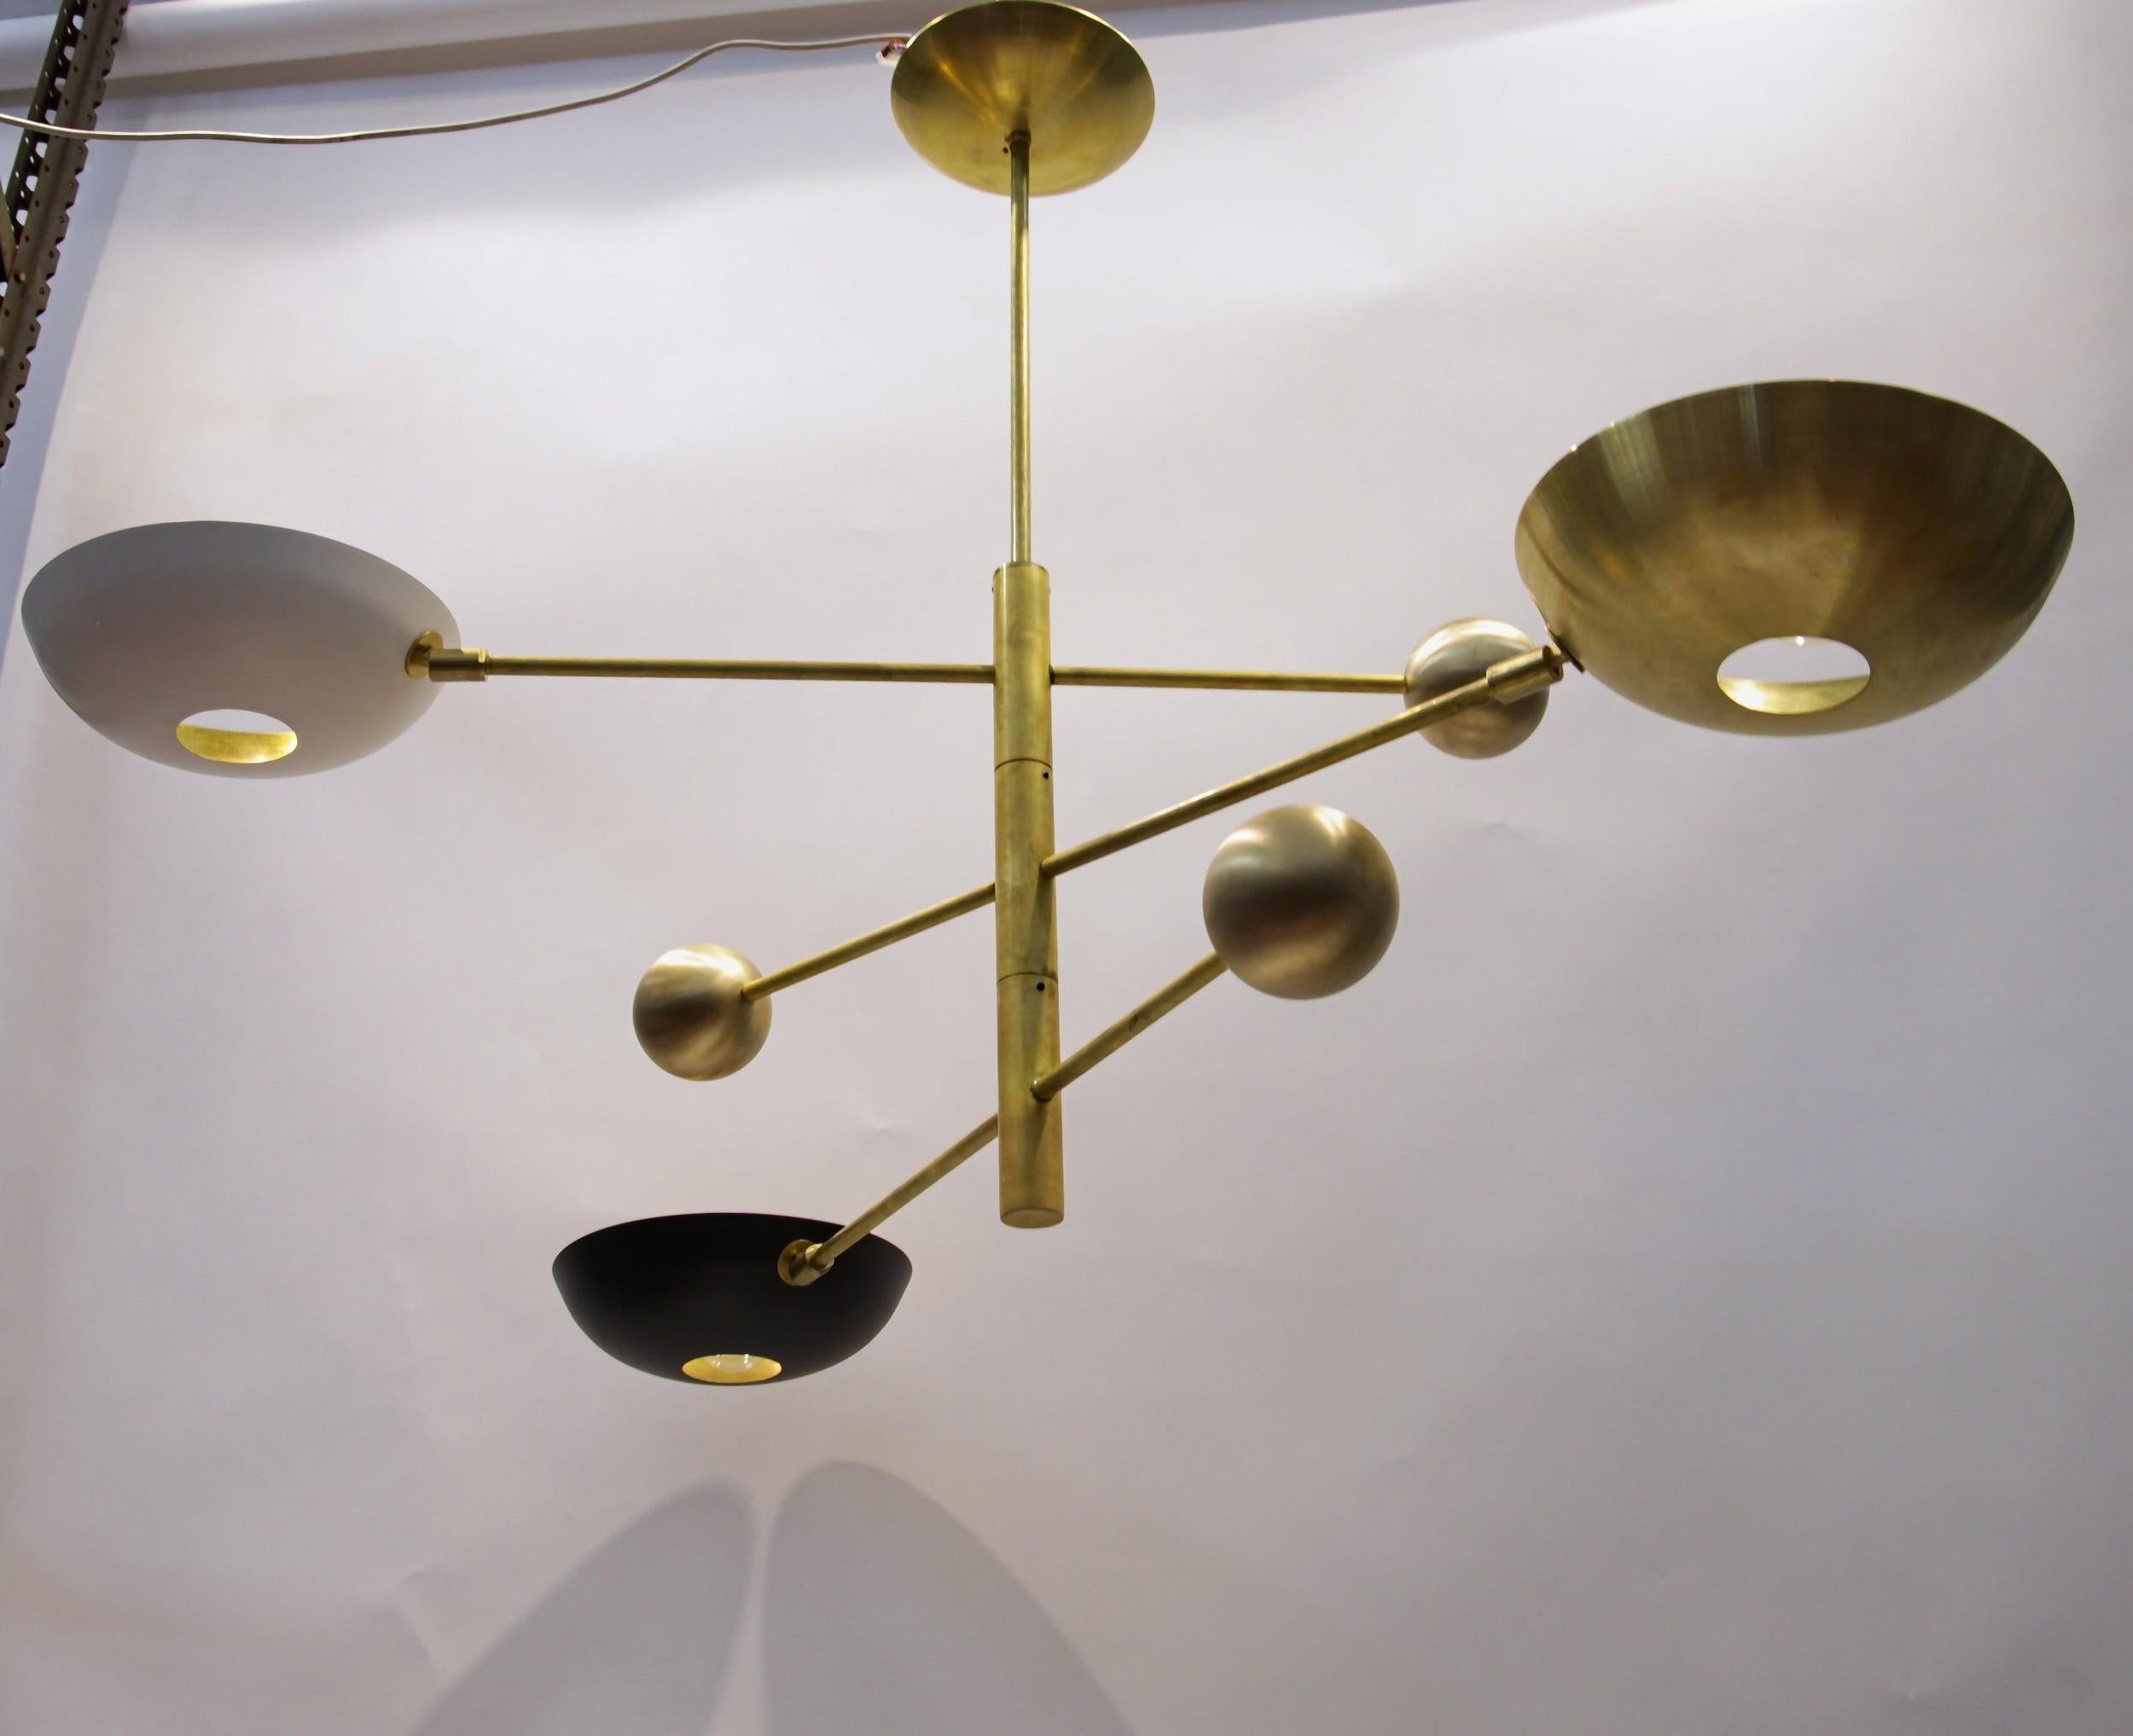 Orbitale Brass Chandelier 3 Rotating Balanced Arms, 120 cm 48 inches diameter For Sale 9